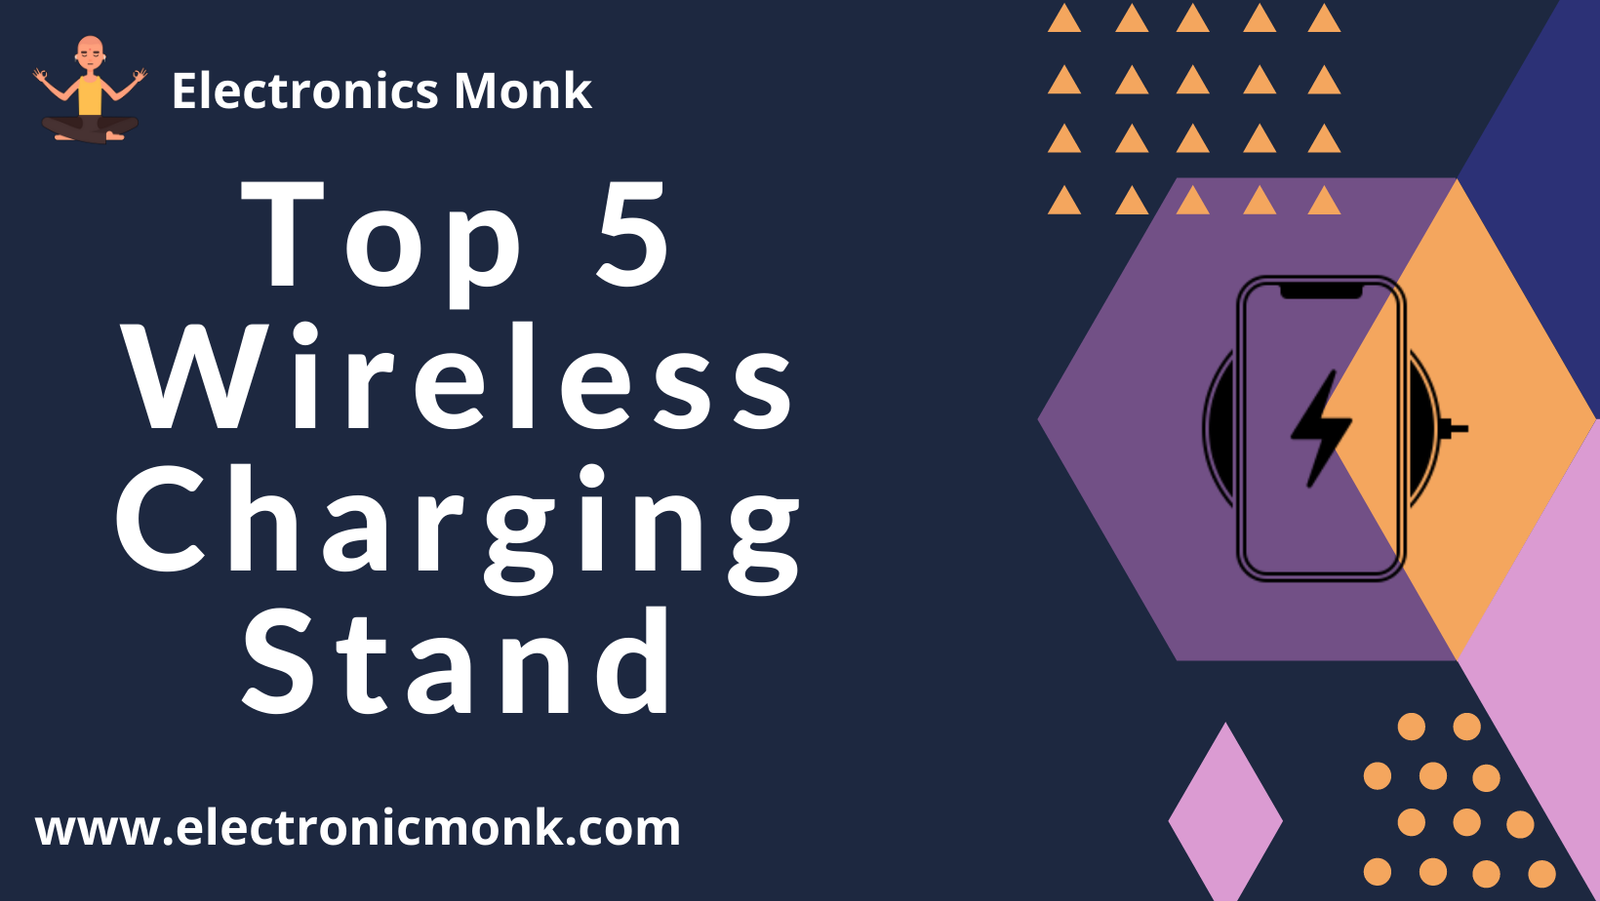 Top 5 wireless charging stand